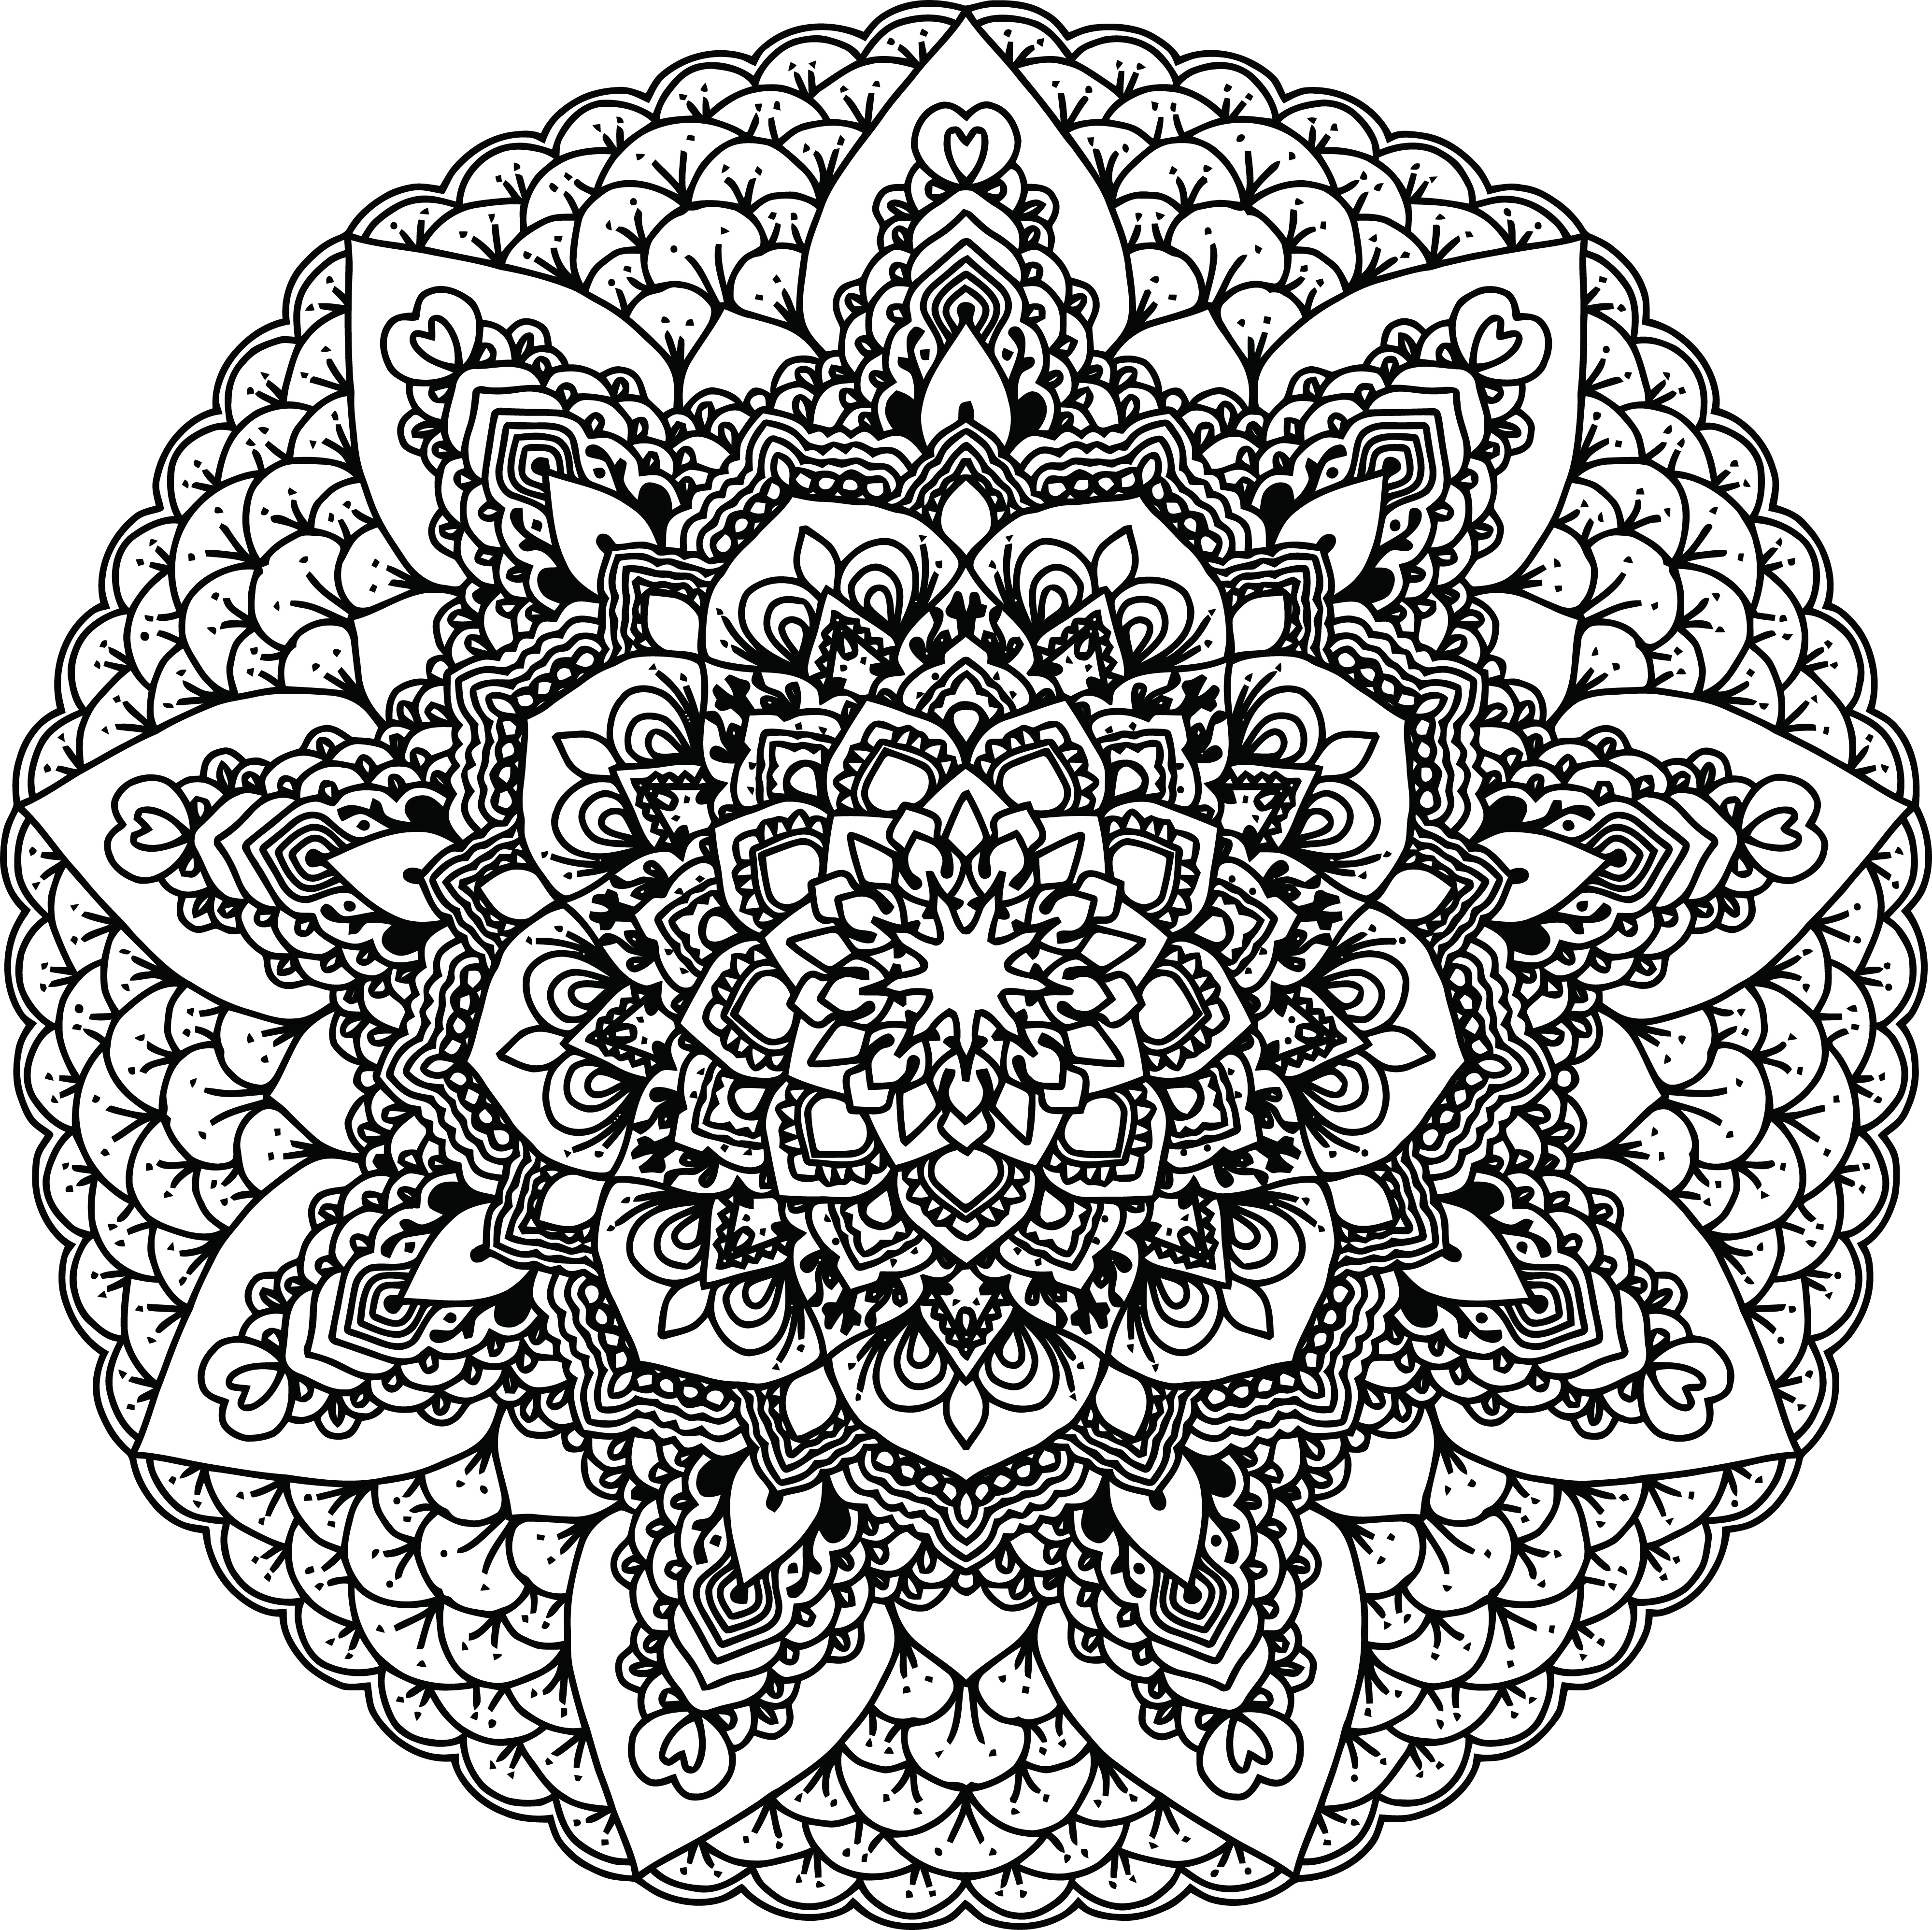  Free Black And White Coloring Pages Free Download Gmbar co